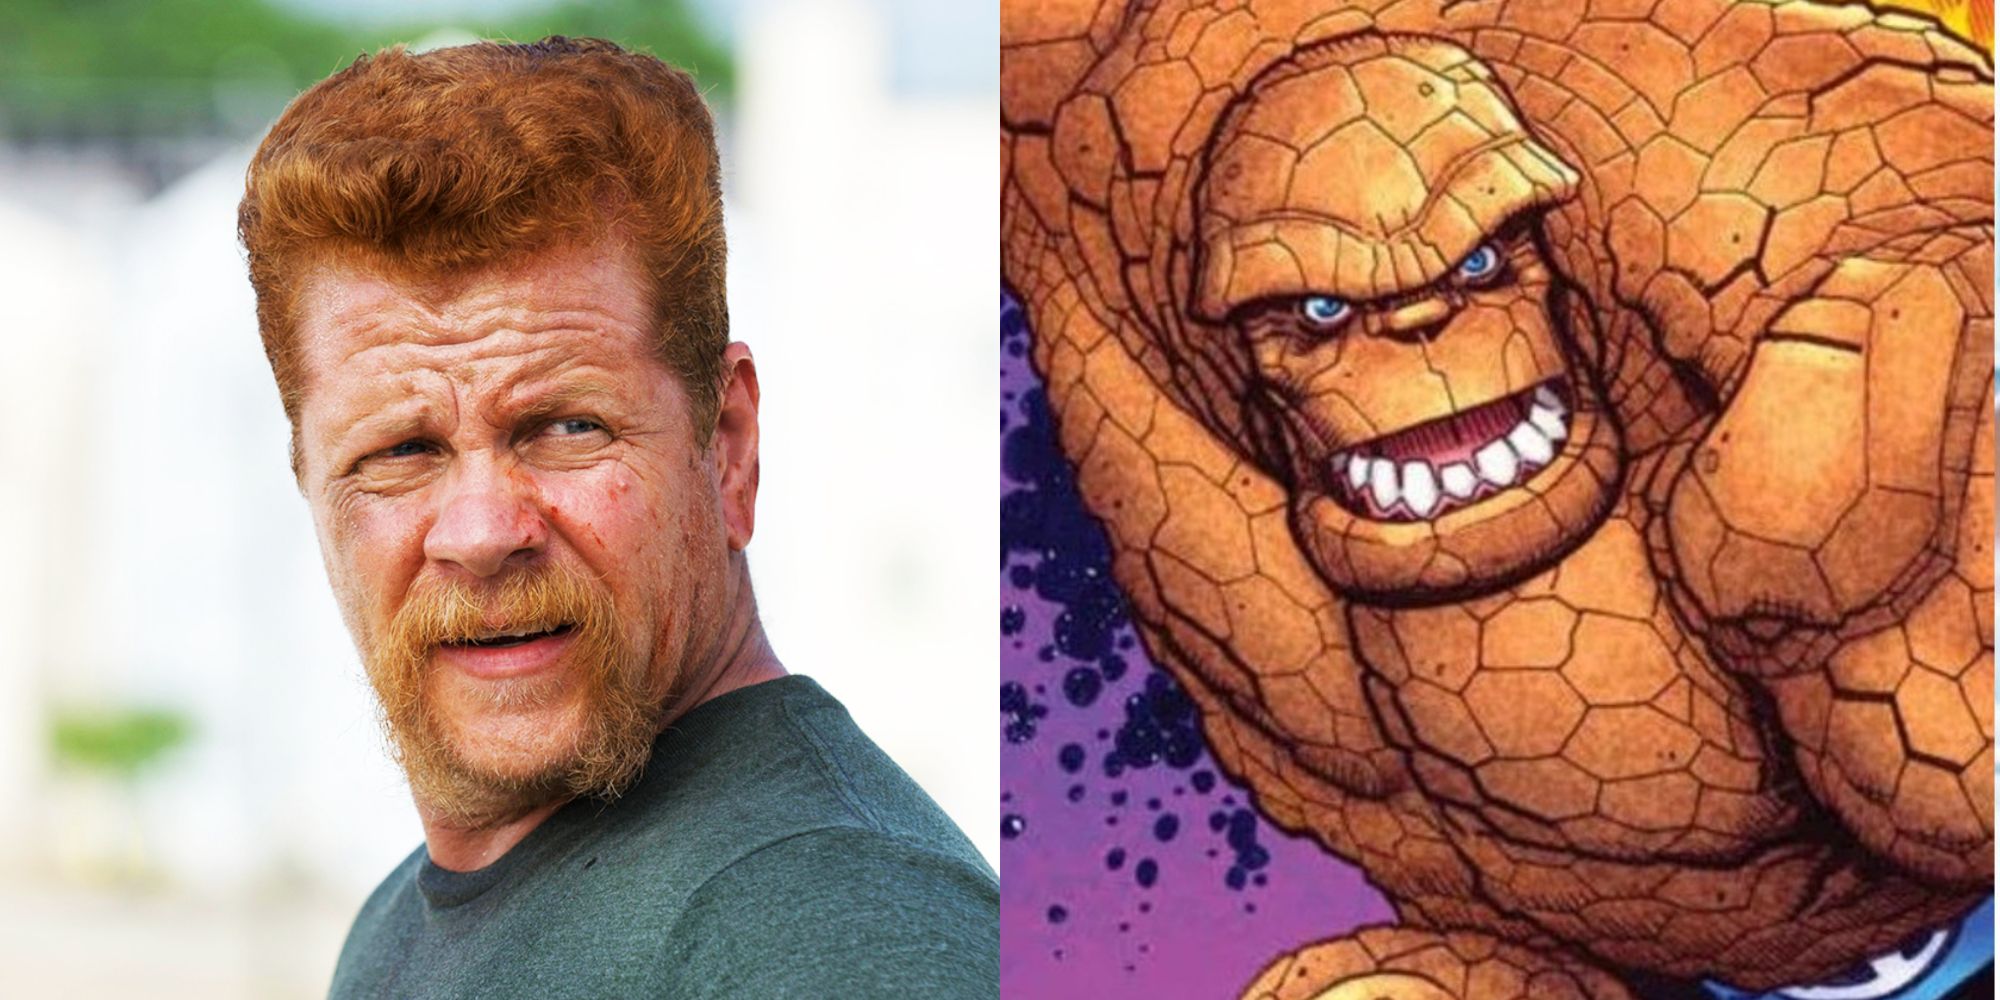 A split image of Michael Cudlitz and The Thing